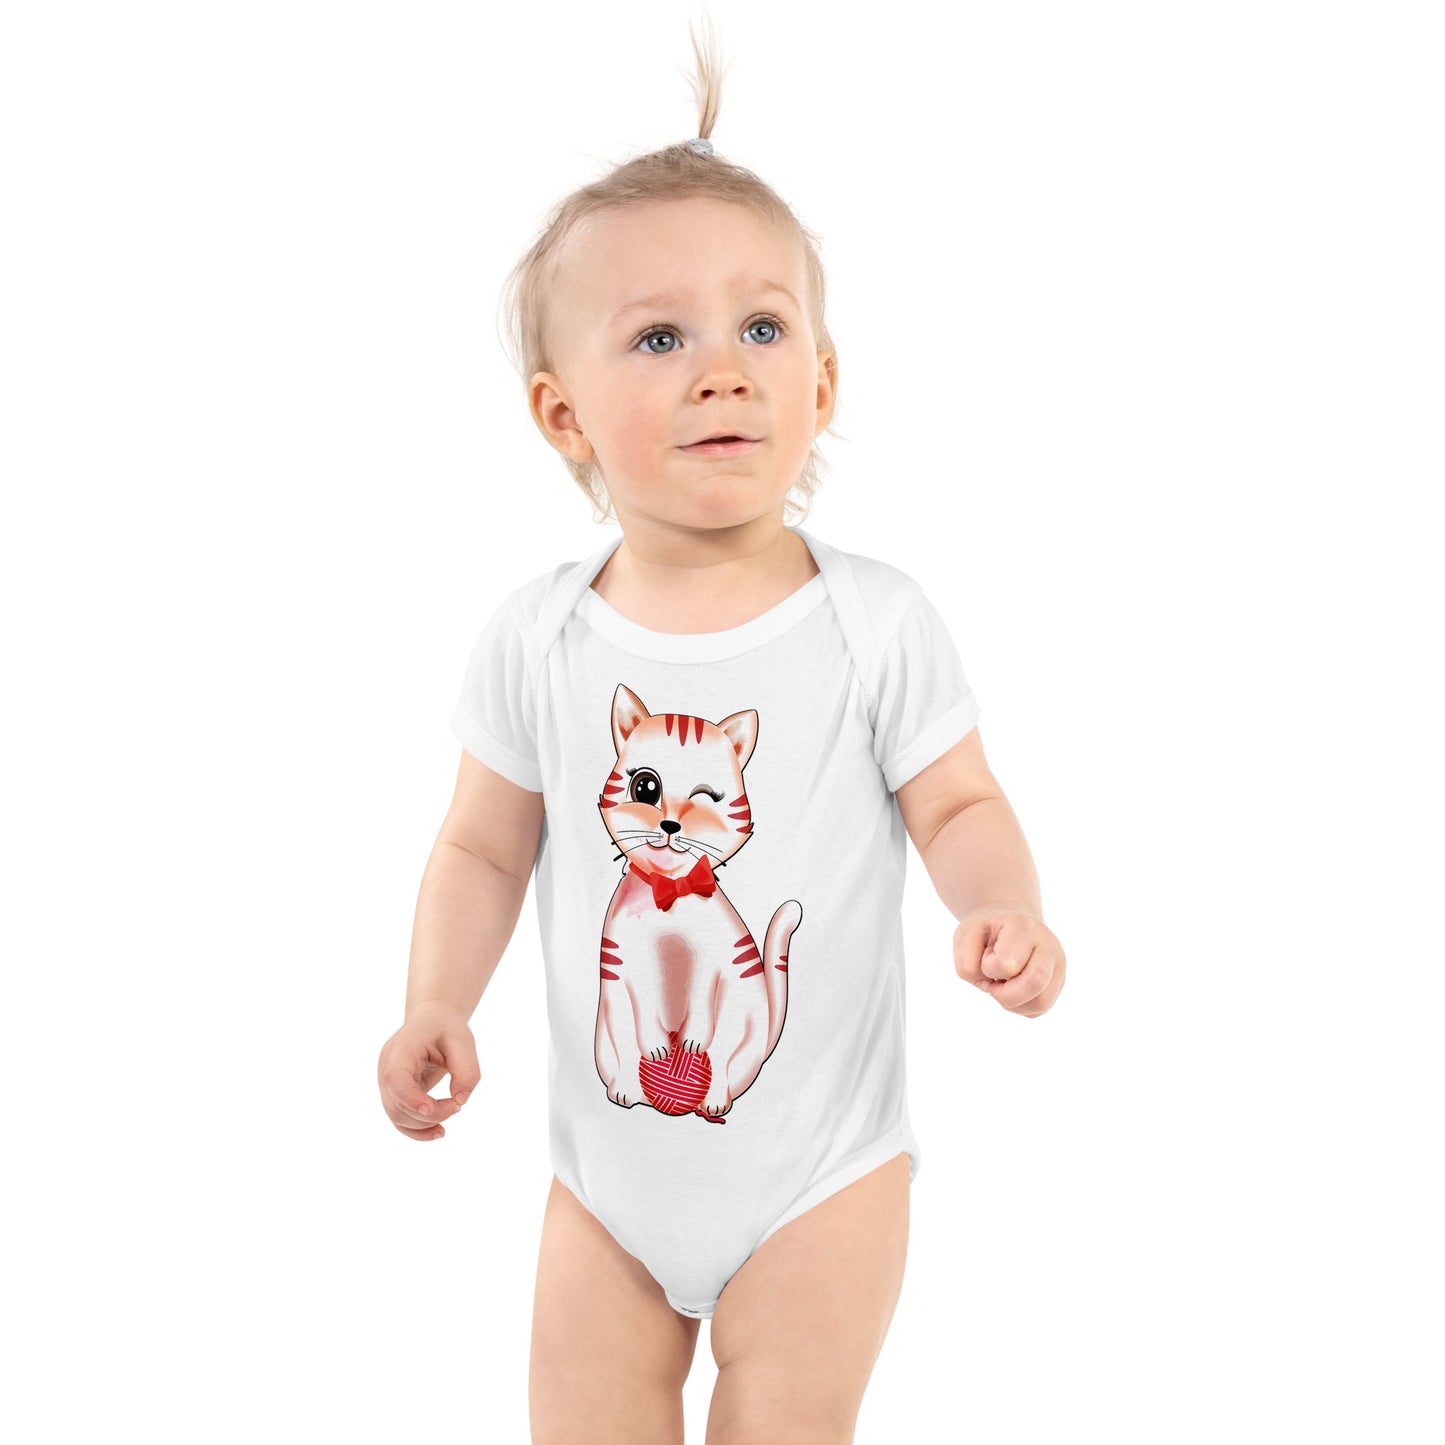 Funny Cat with Yarn Ball Bodysuit, No. 0503